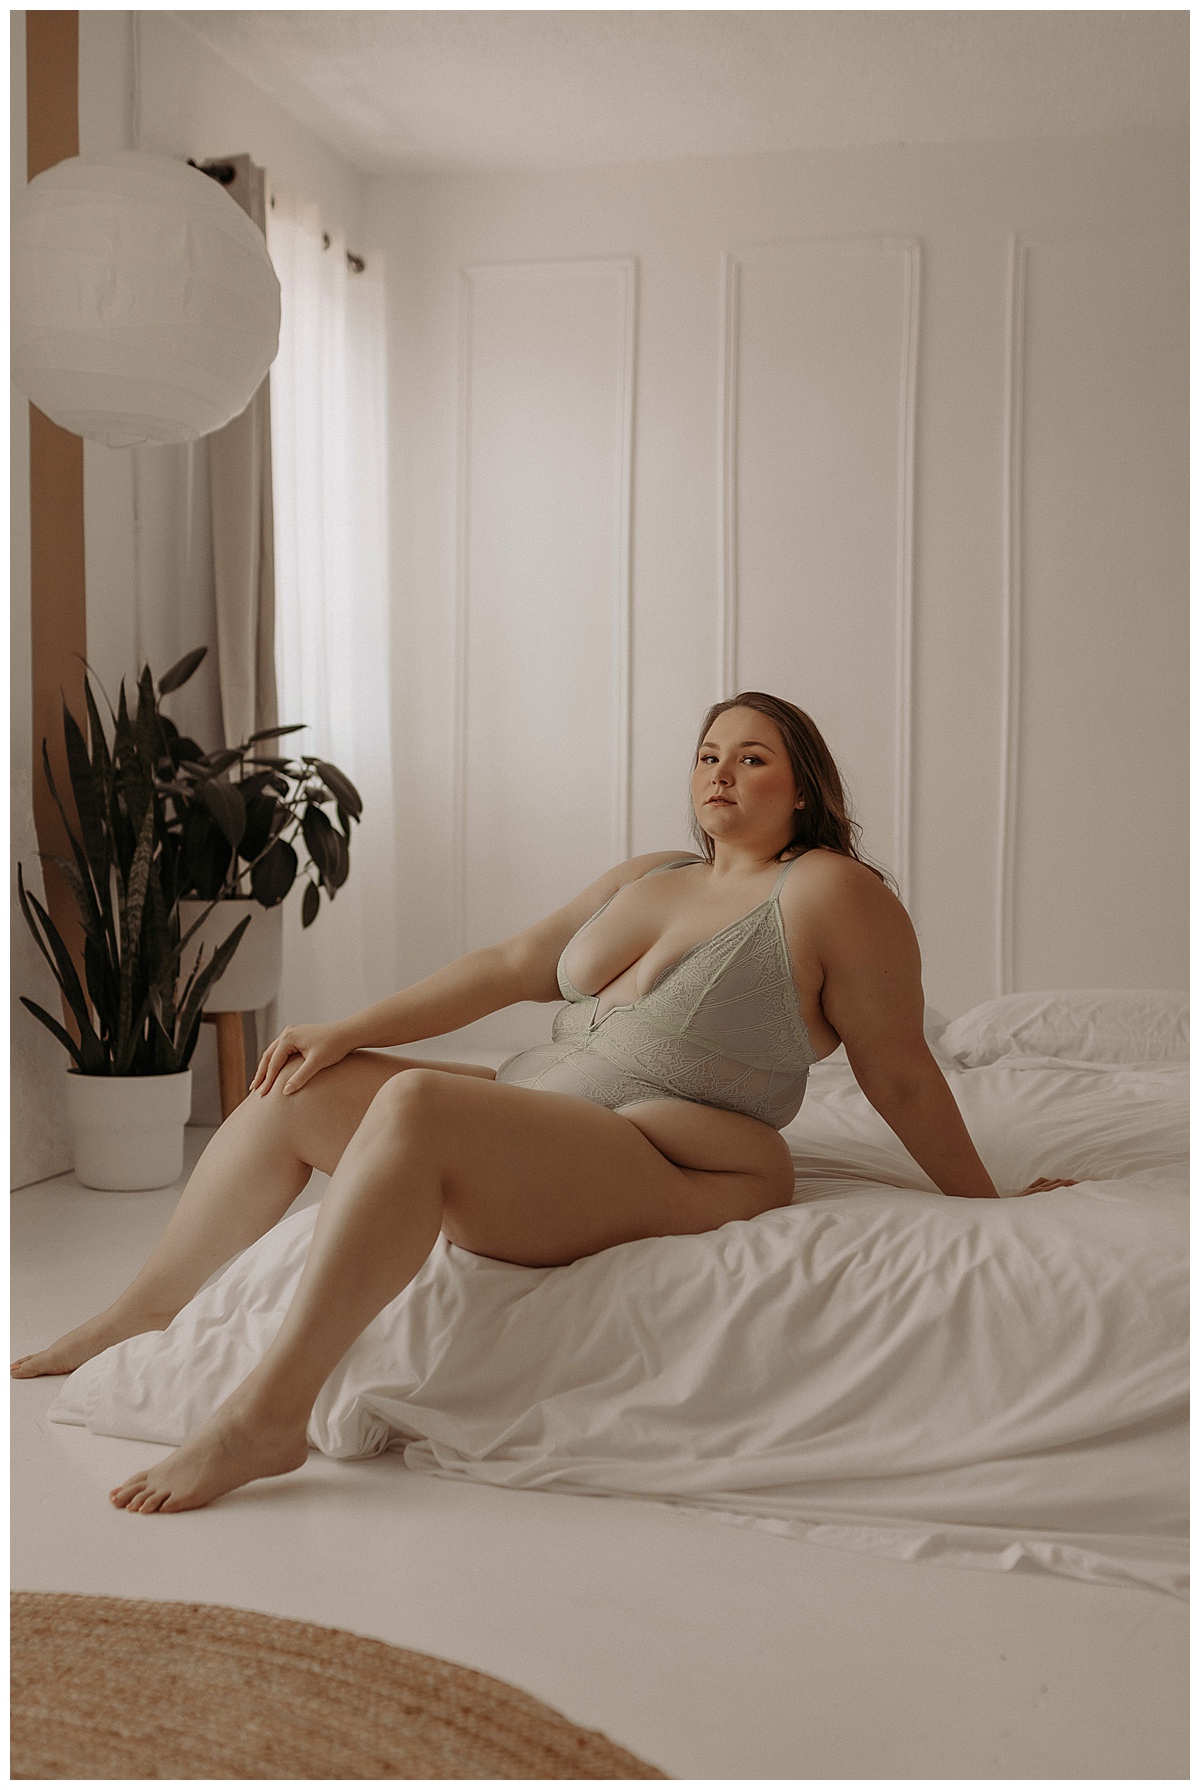 Person leans on the edge of the bed wearing lingerie for Mary Castillo Photography